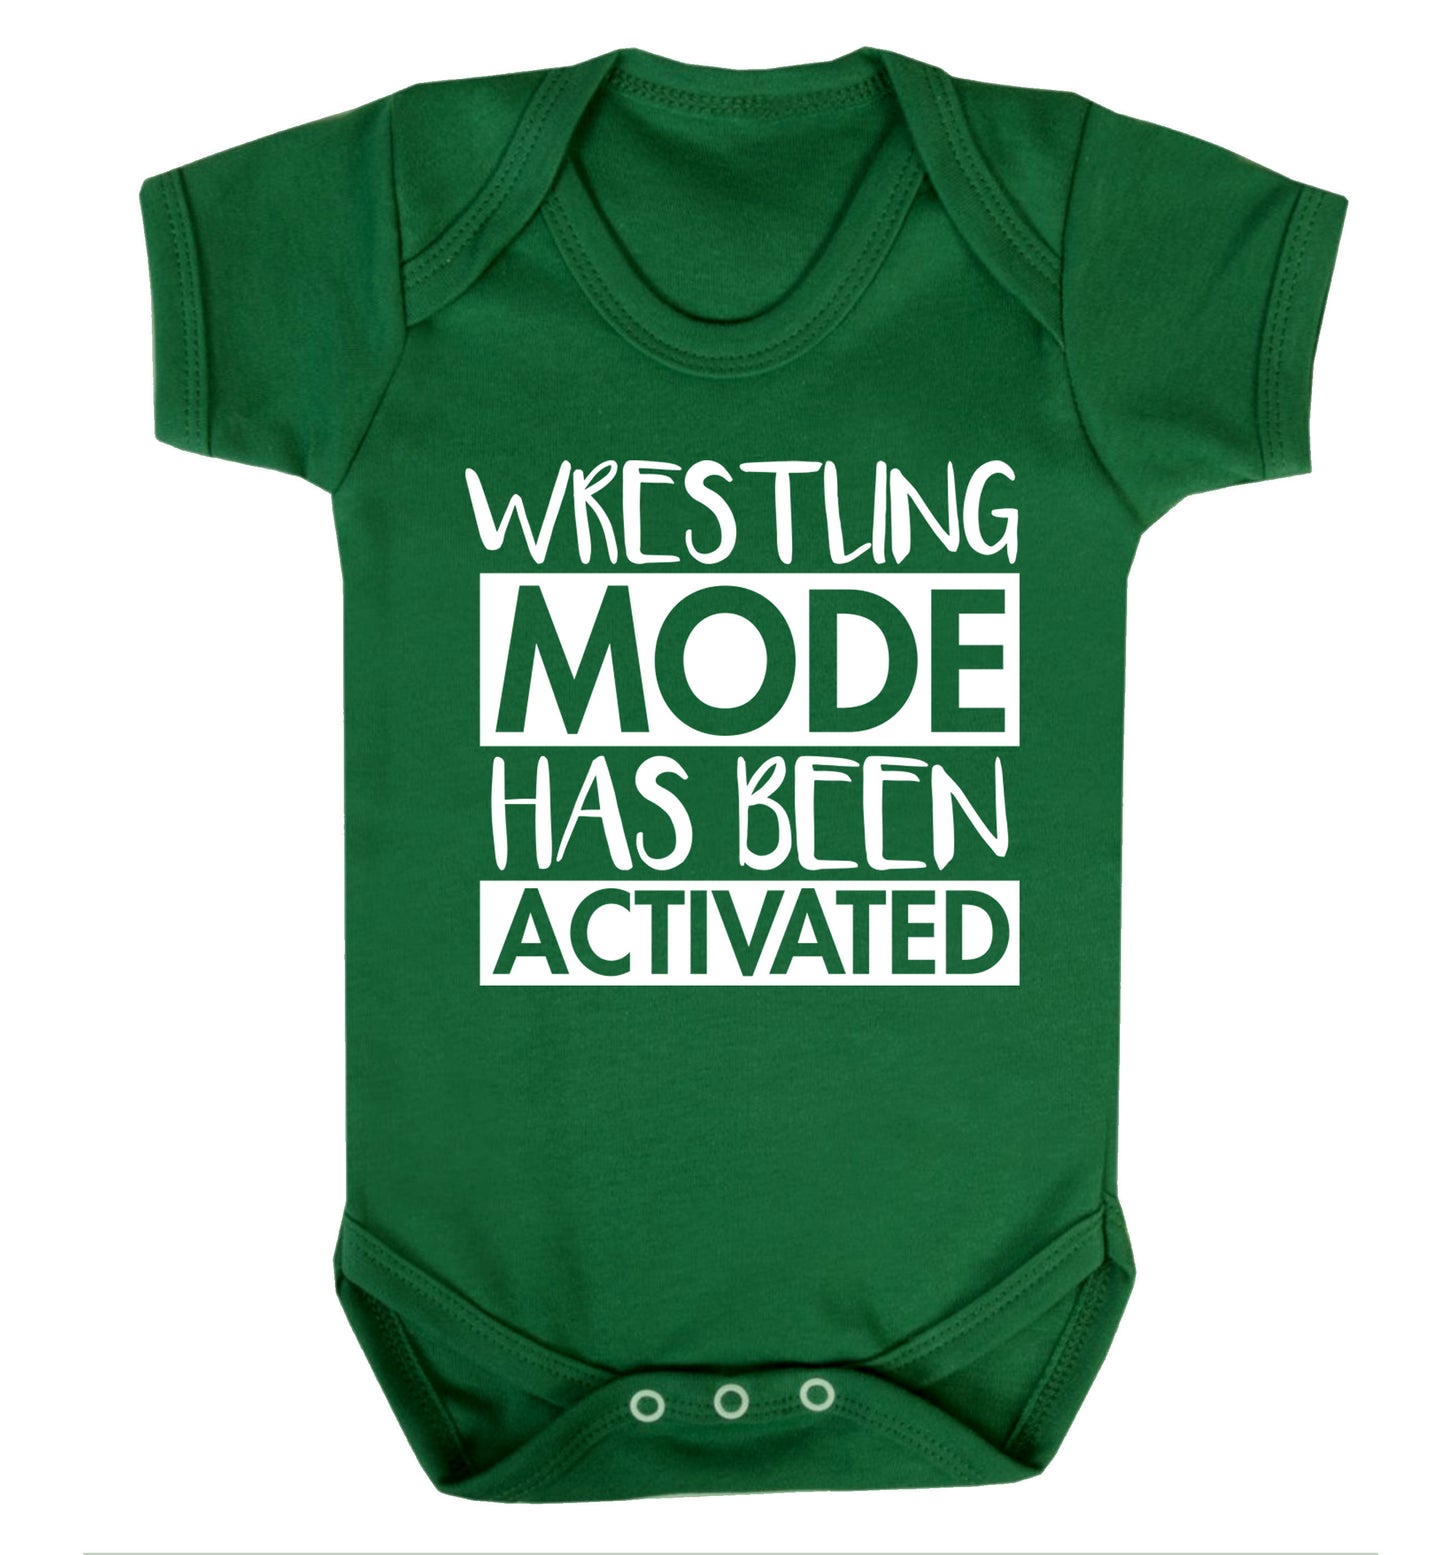 Wresting mode activated Baby Vest green 18-24 months